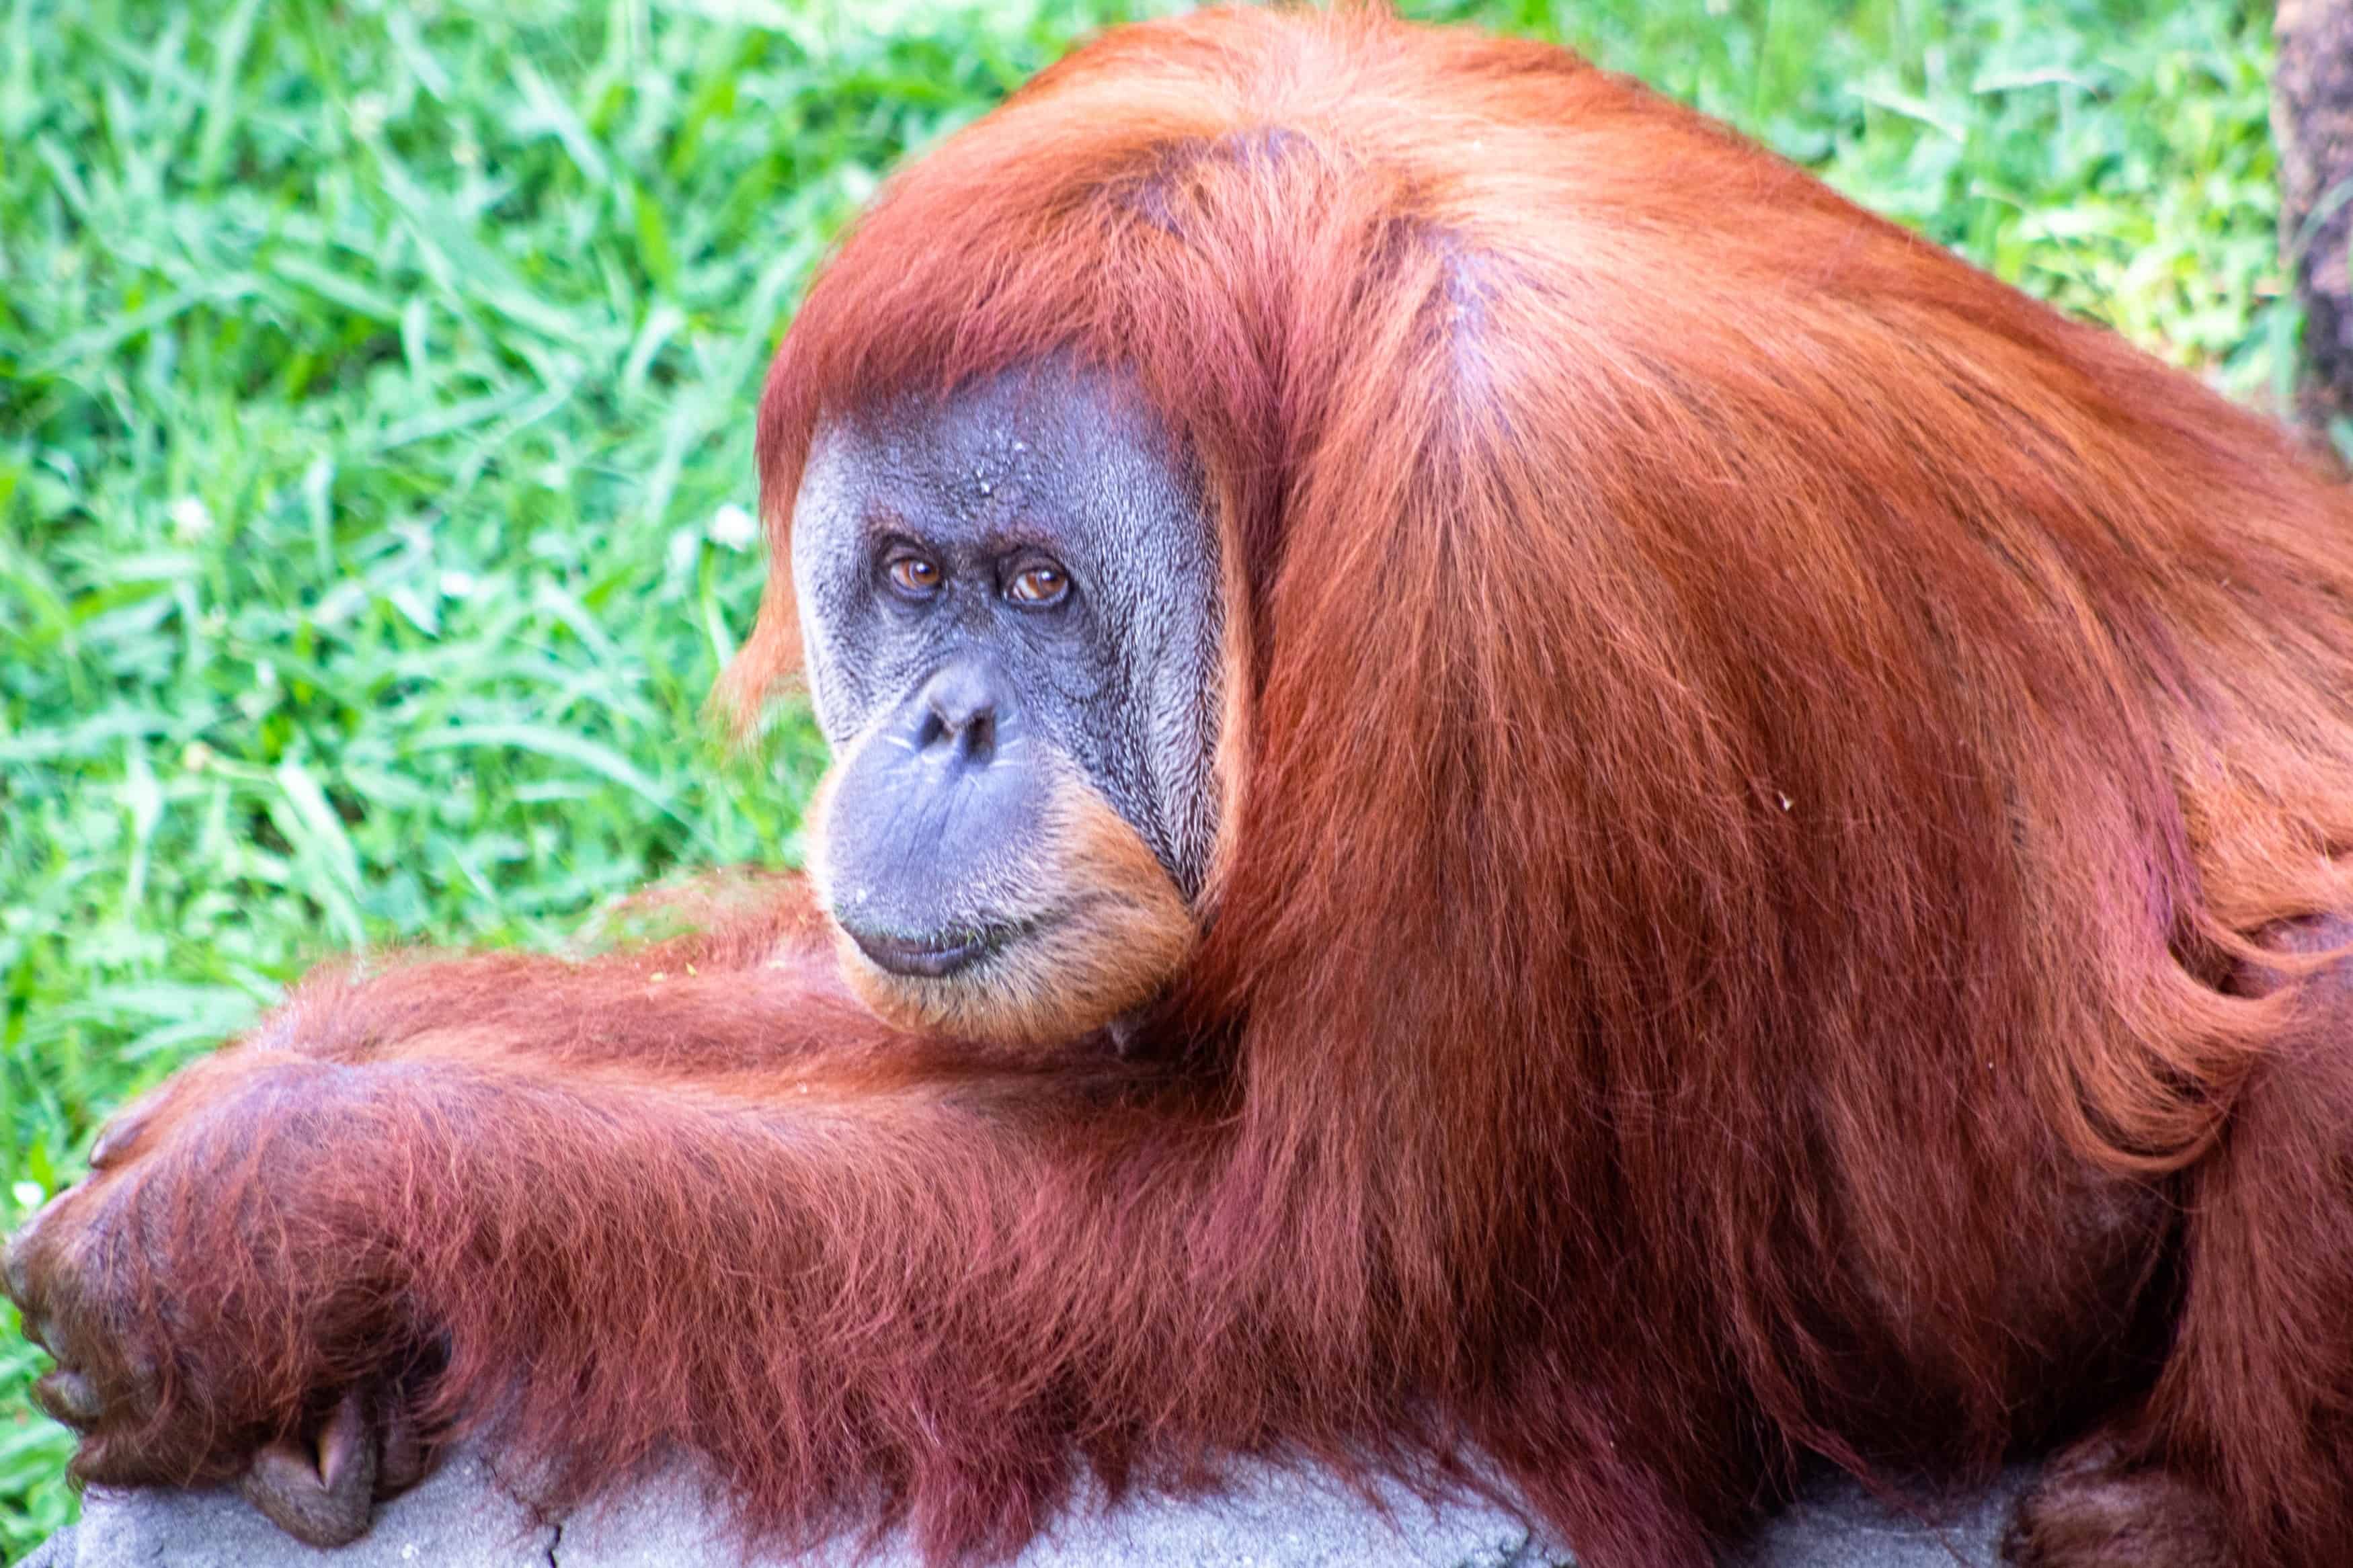 Why Is Palm Oil Bad? What’s the Problem with Palm Oil?